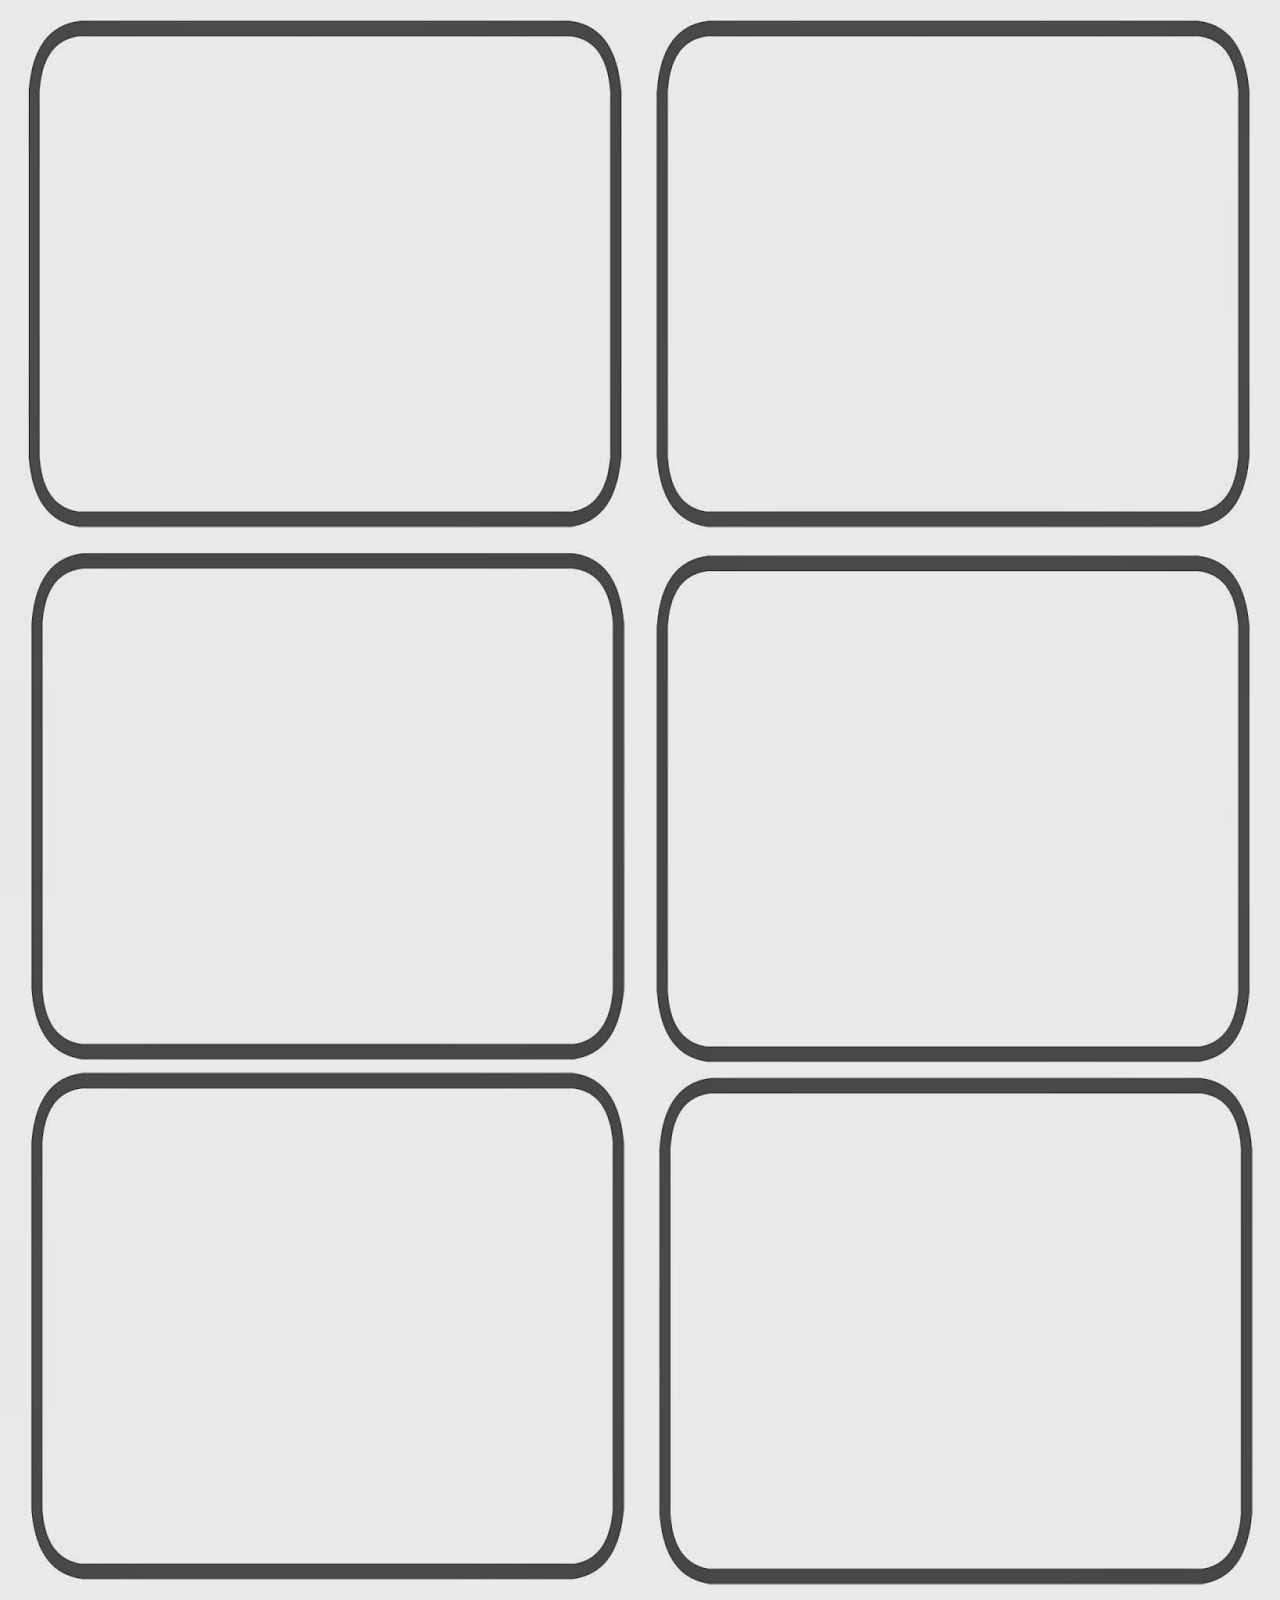 Blank Game Cards | Theveliger With Template For Game Cards